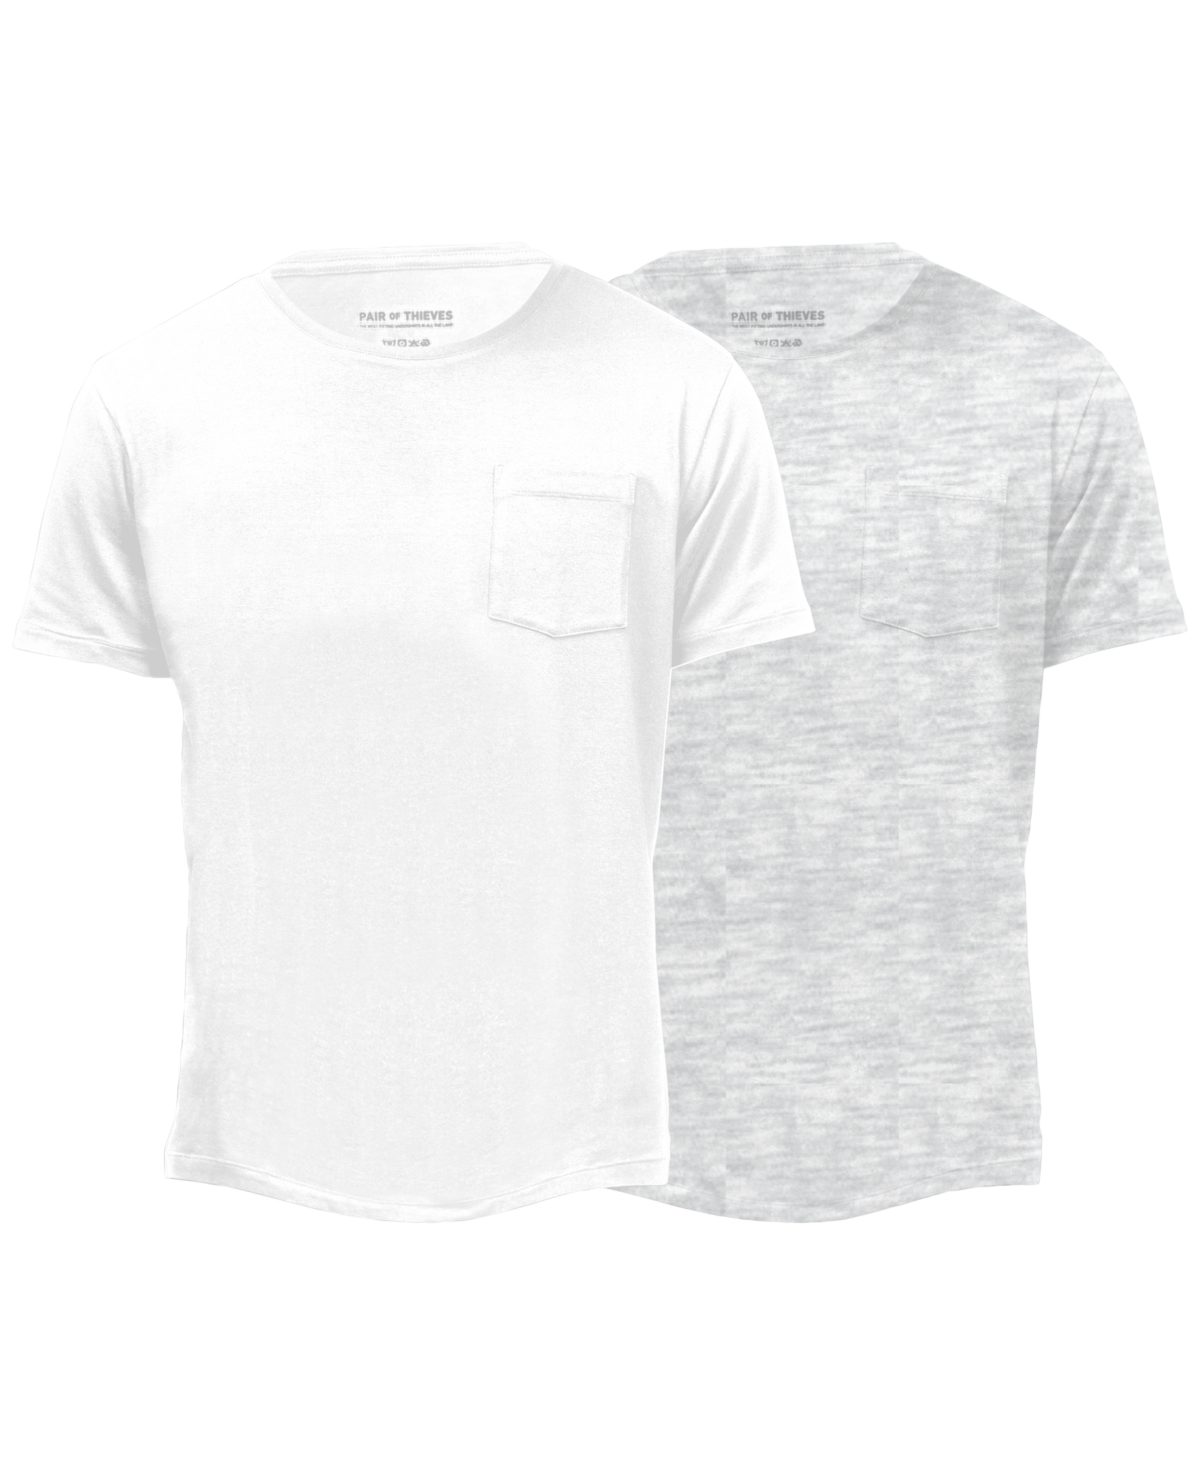 Pair Of Thieves Men's Rfe Supersoft Pocket T-shirts - 2pk. In Grey/white